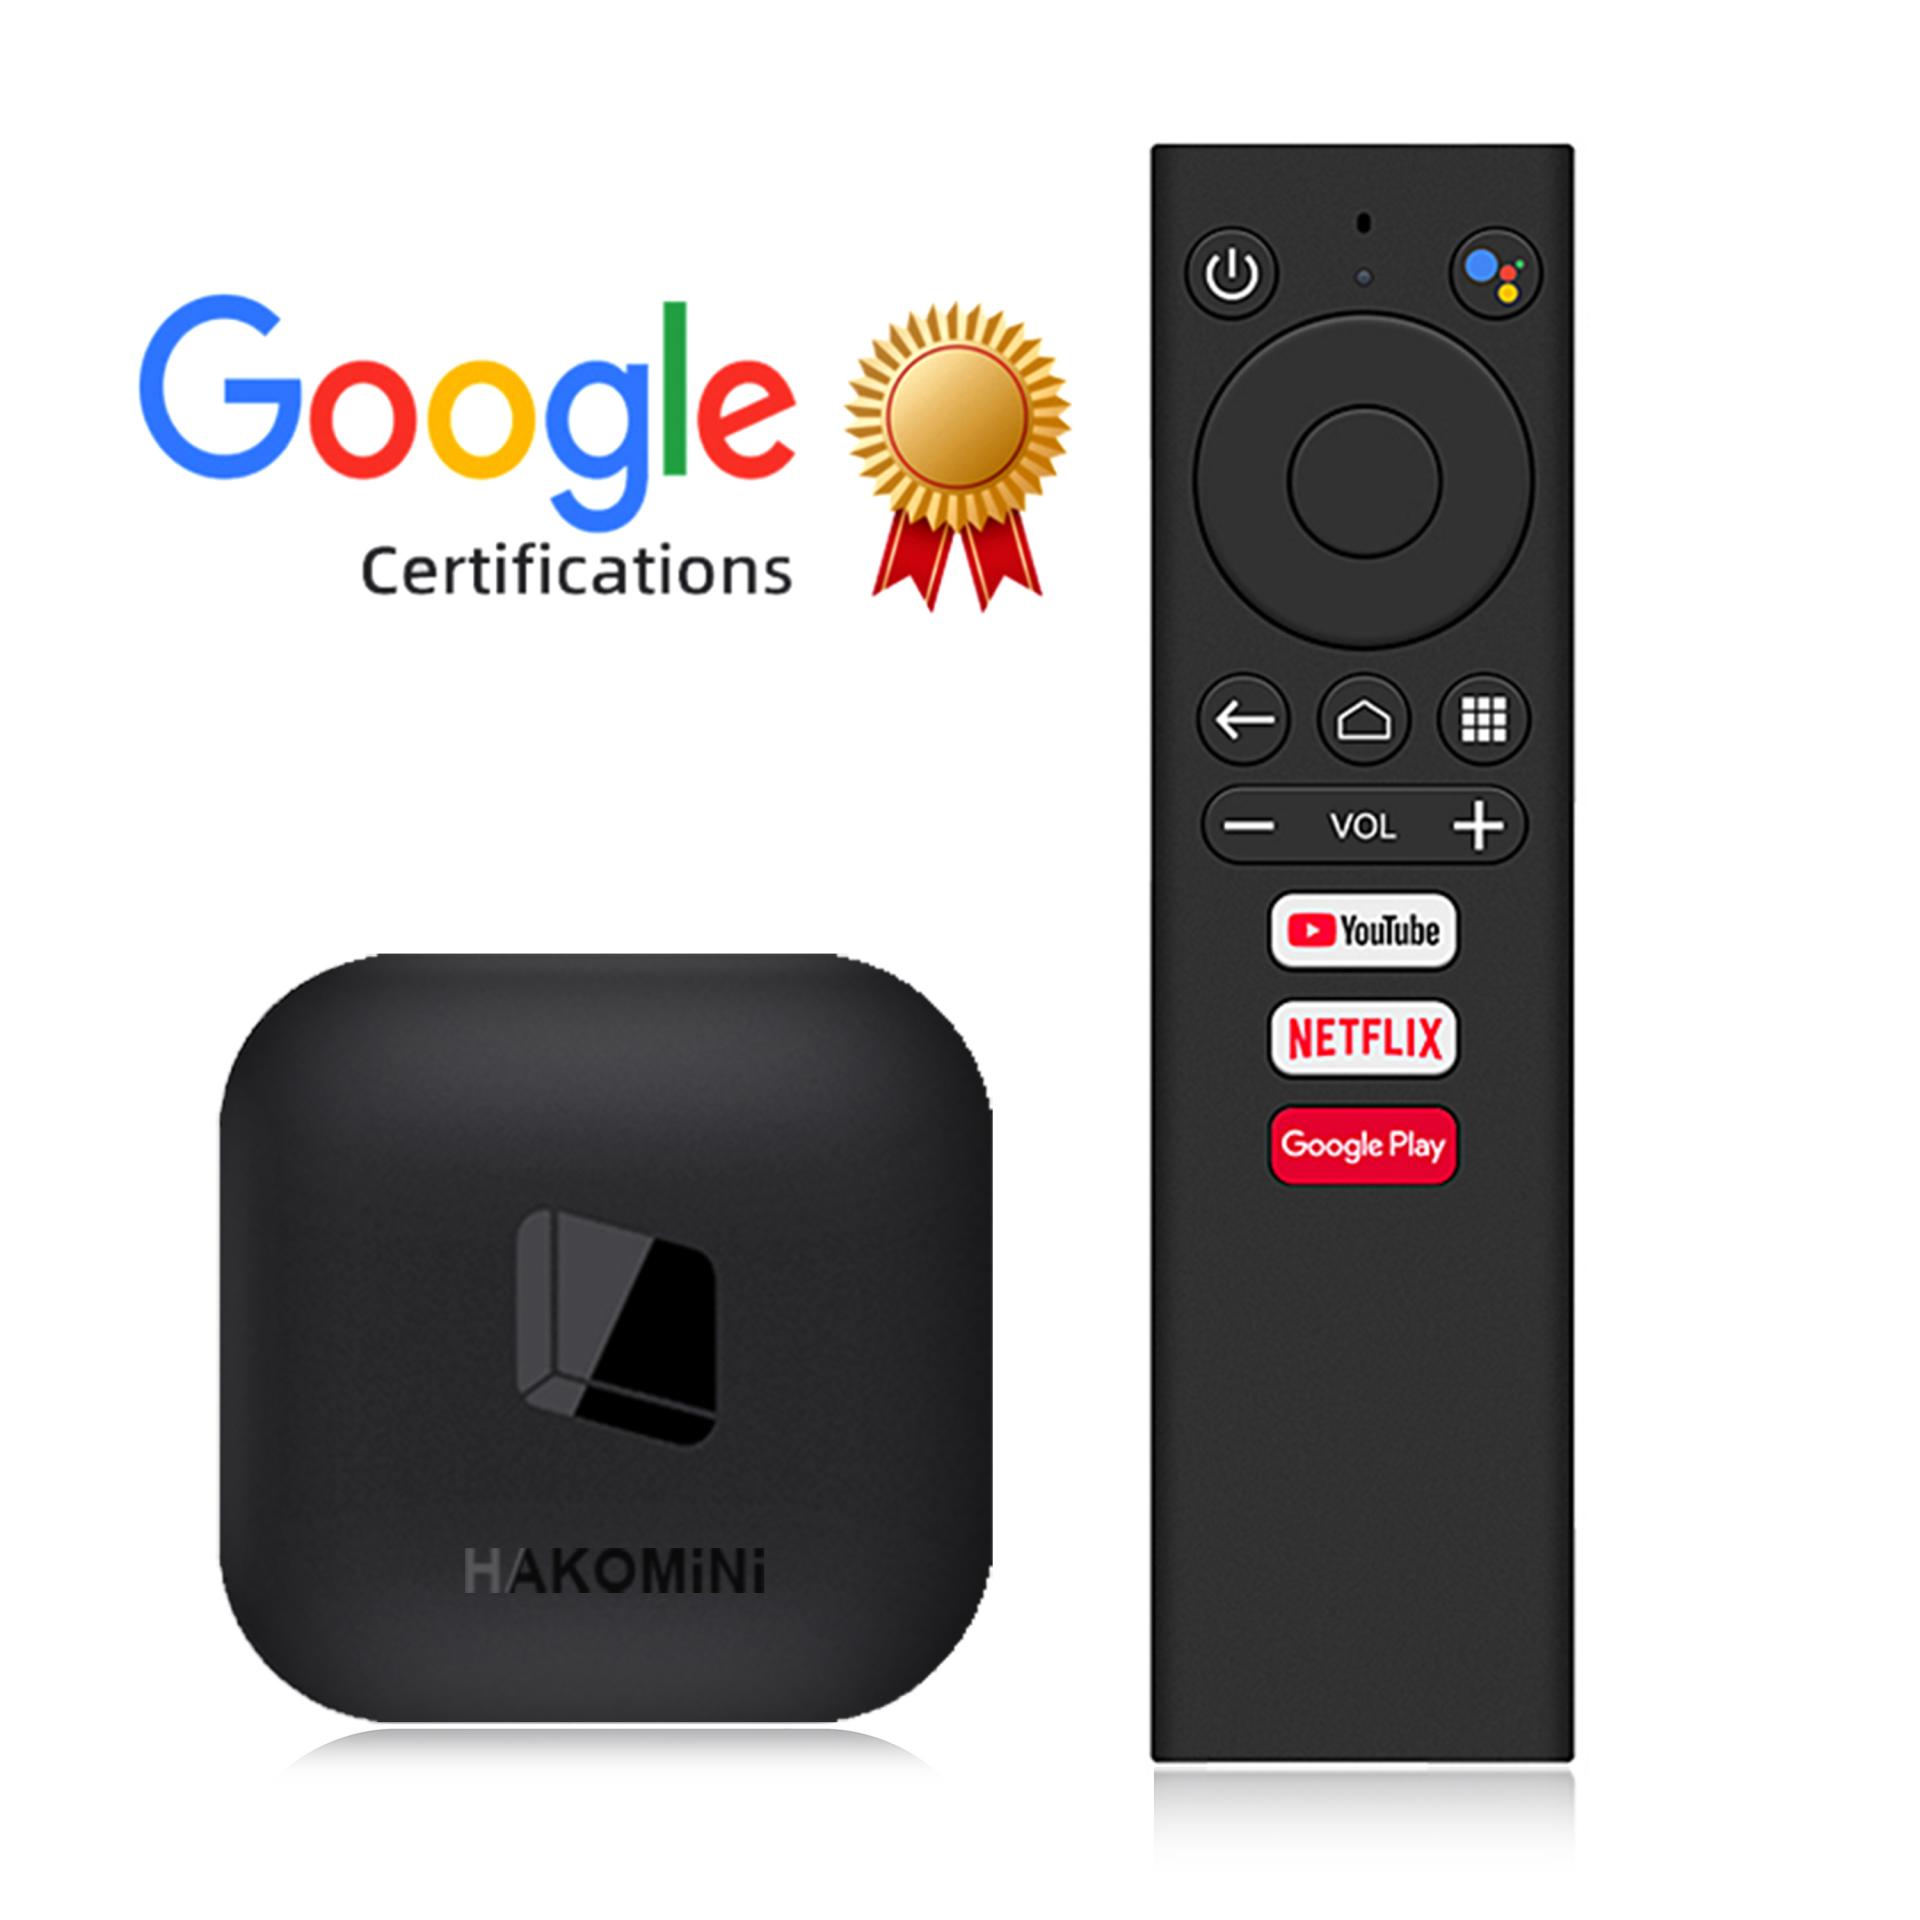 The best Google-certified Android TV box